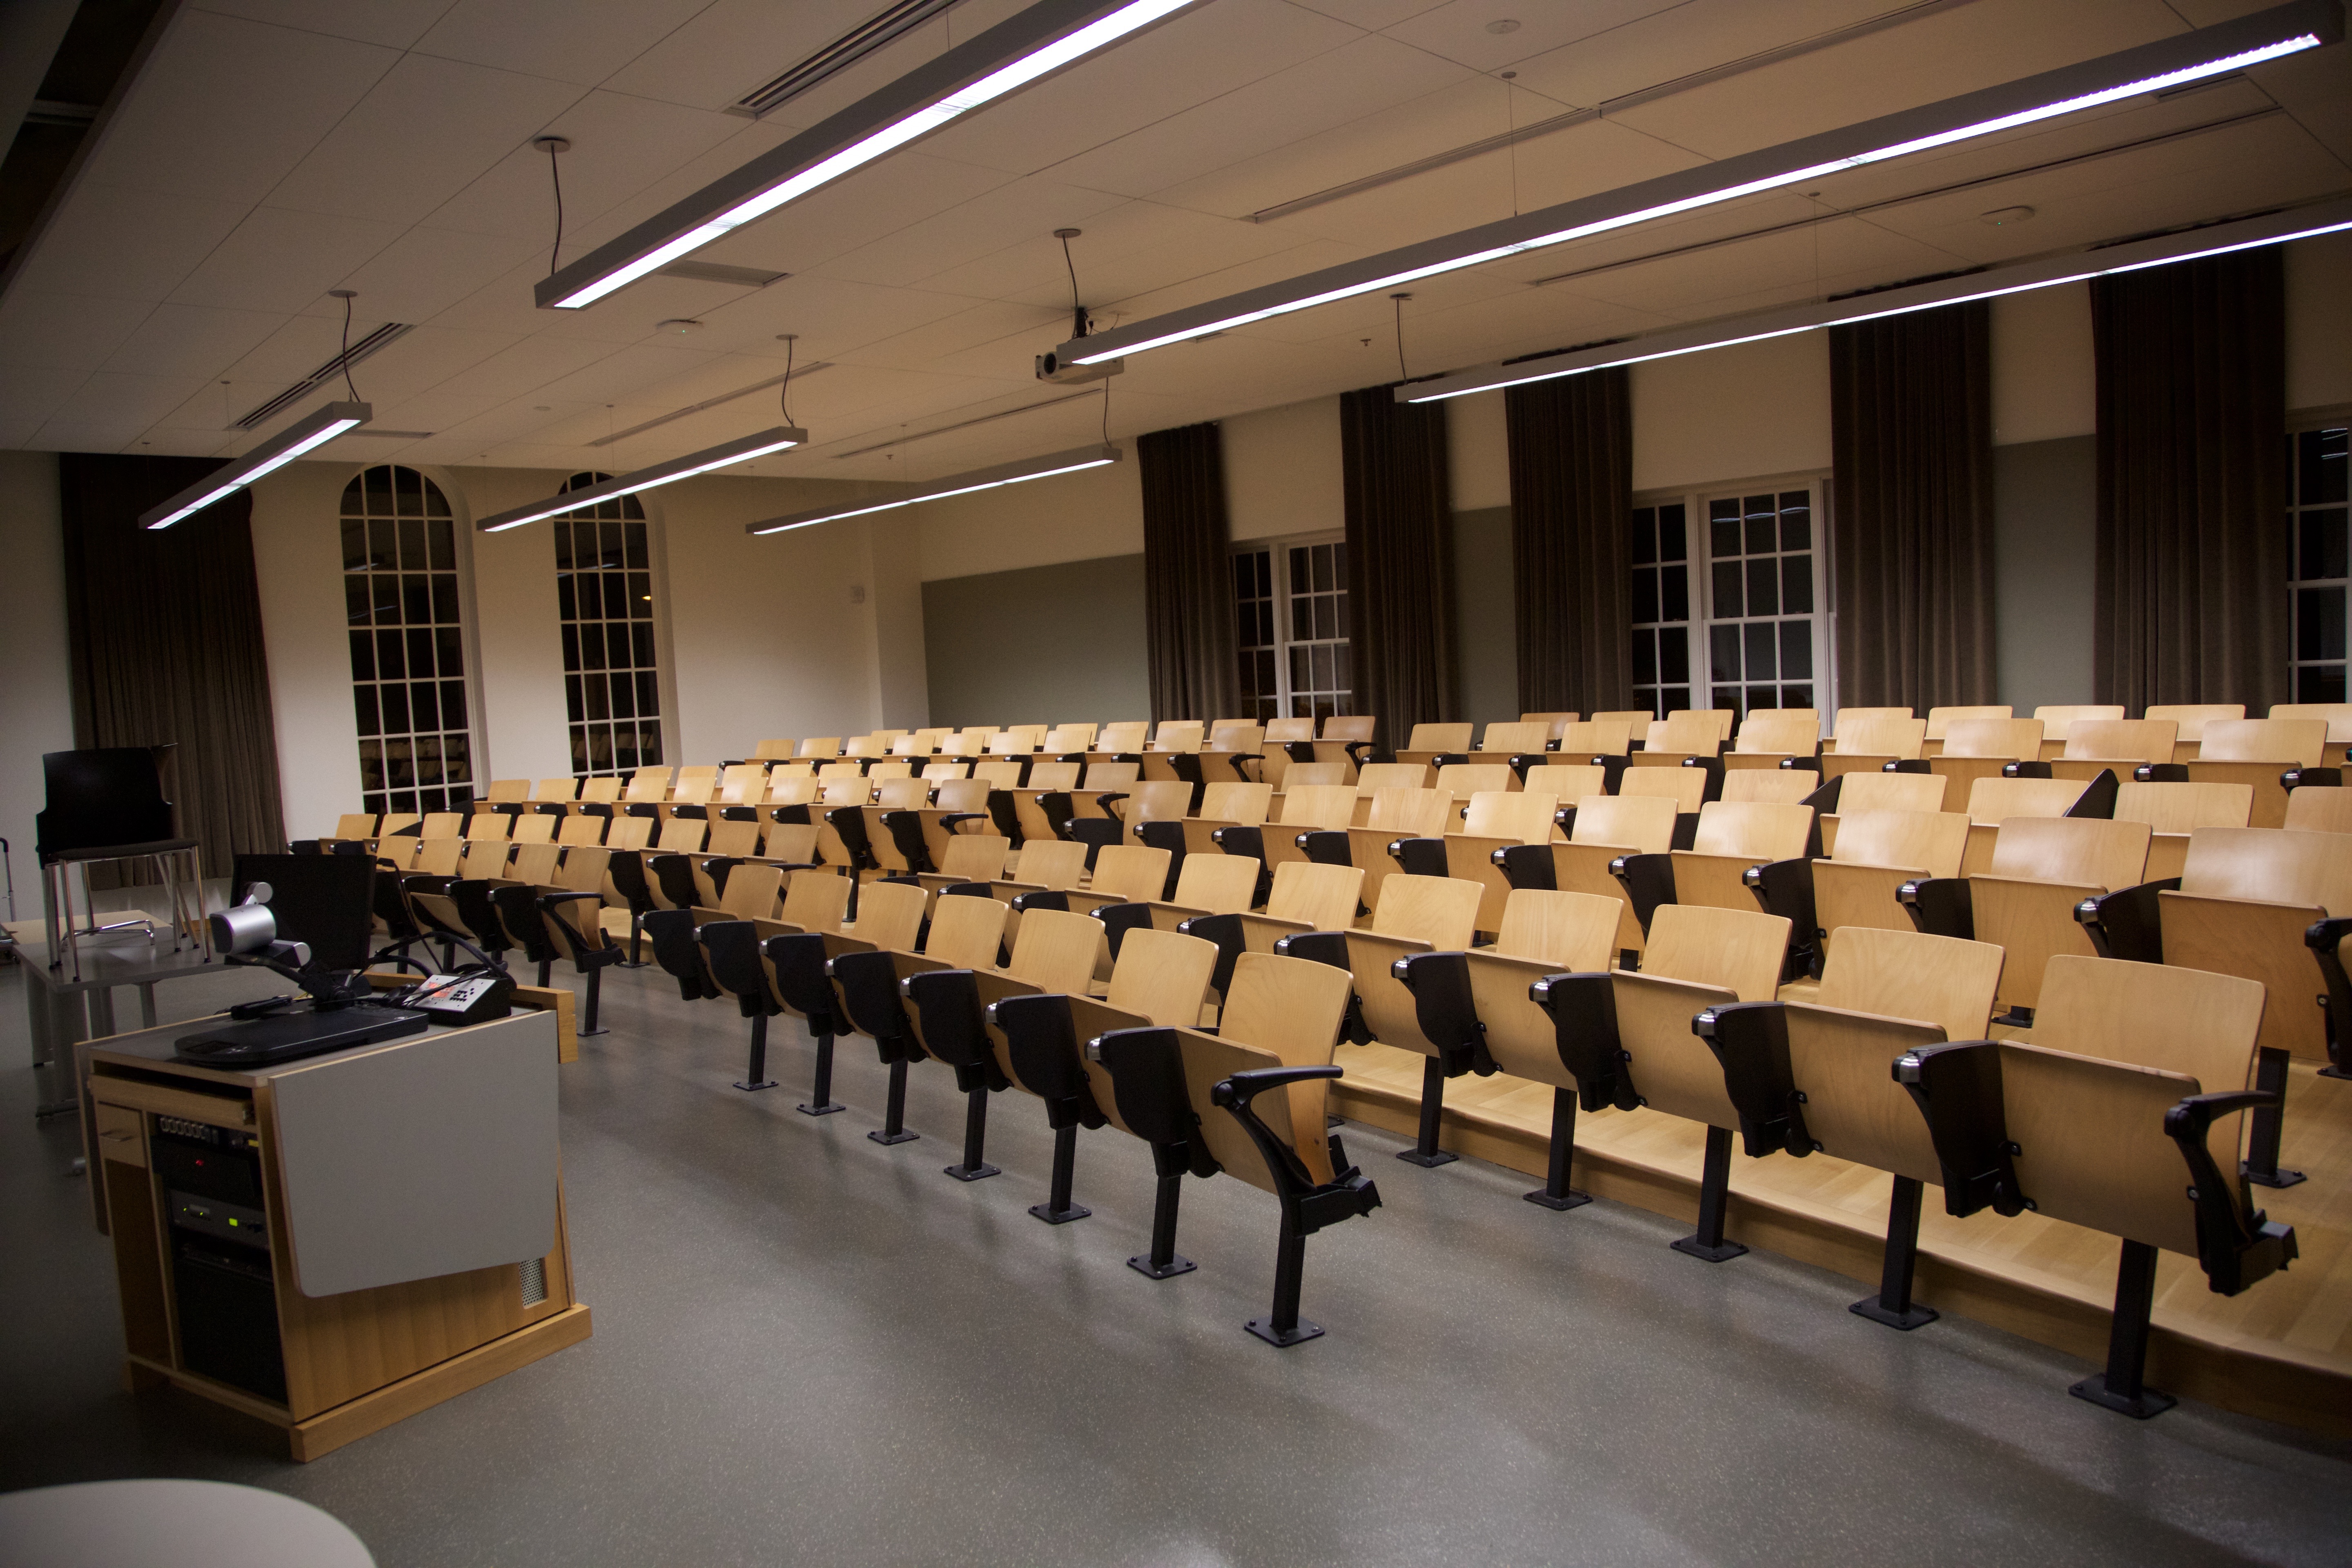 View of a lecture room from the back